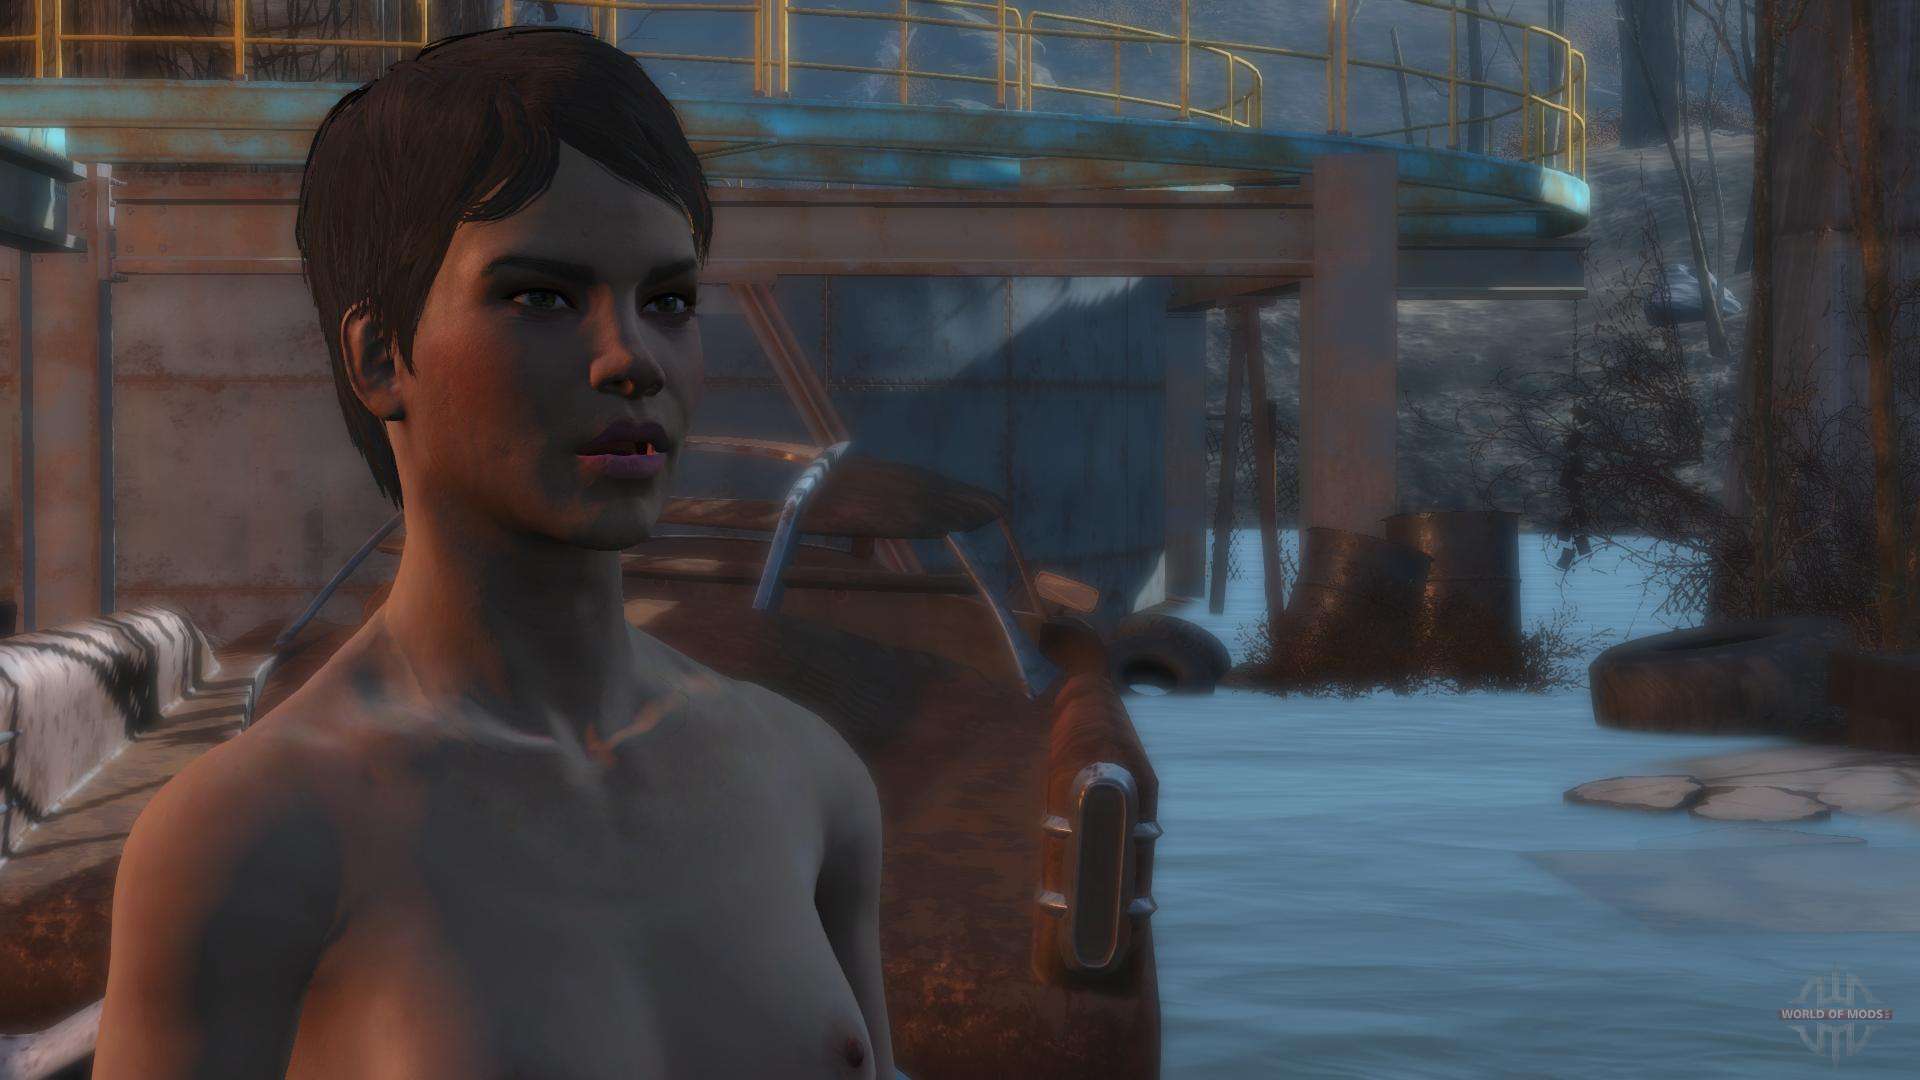 Caliente's Beautiful Bodies Enhancer is a mod for Fallout 4 that repla...